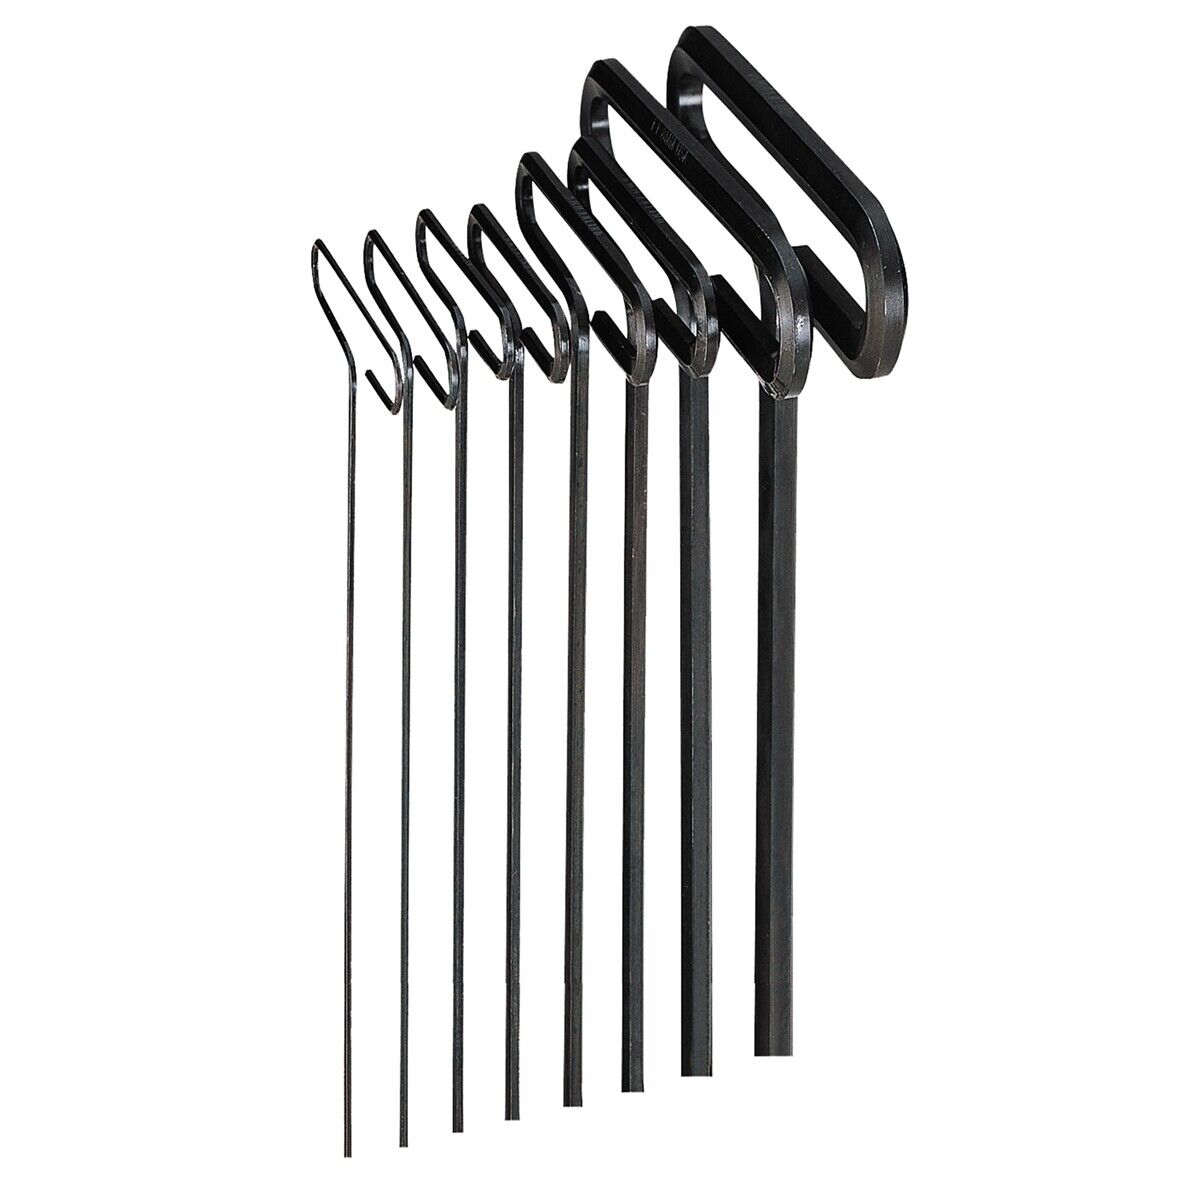 Eklind Tool Company Hex Key Factory outlet Set Max 60% OFF 8 3 Sae 9In 4In 32-1 Pc T-Handle